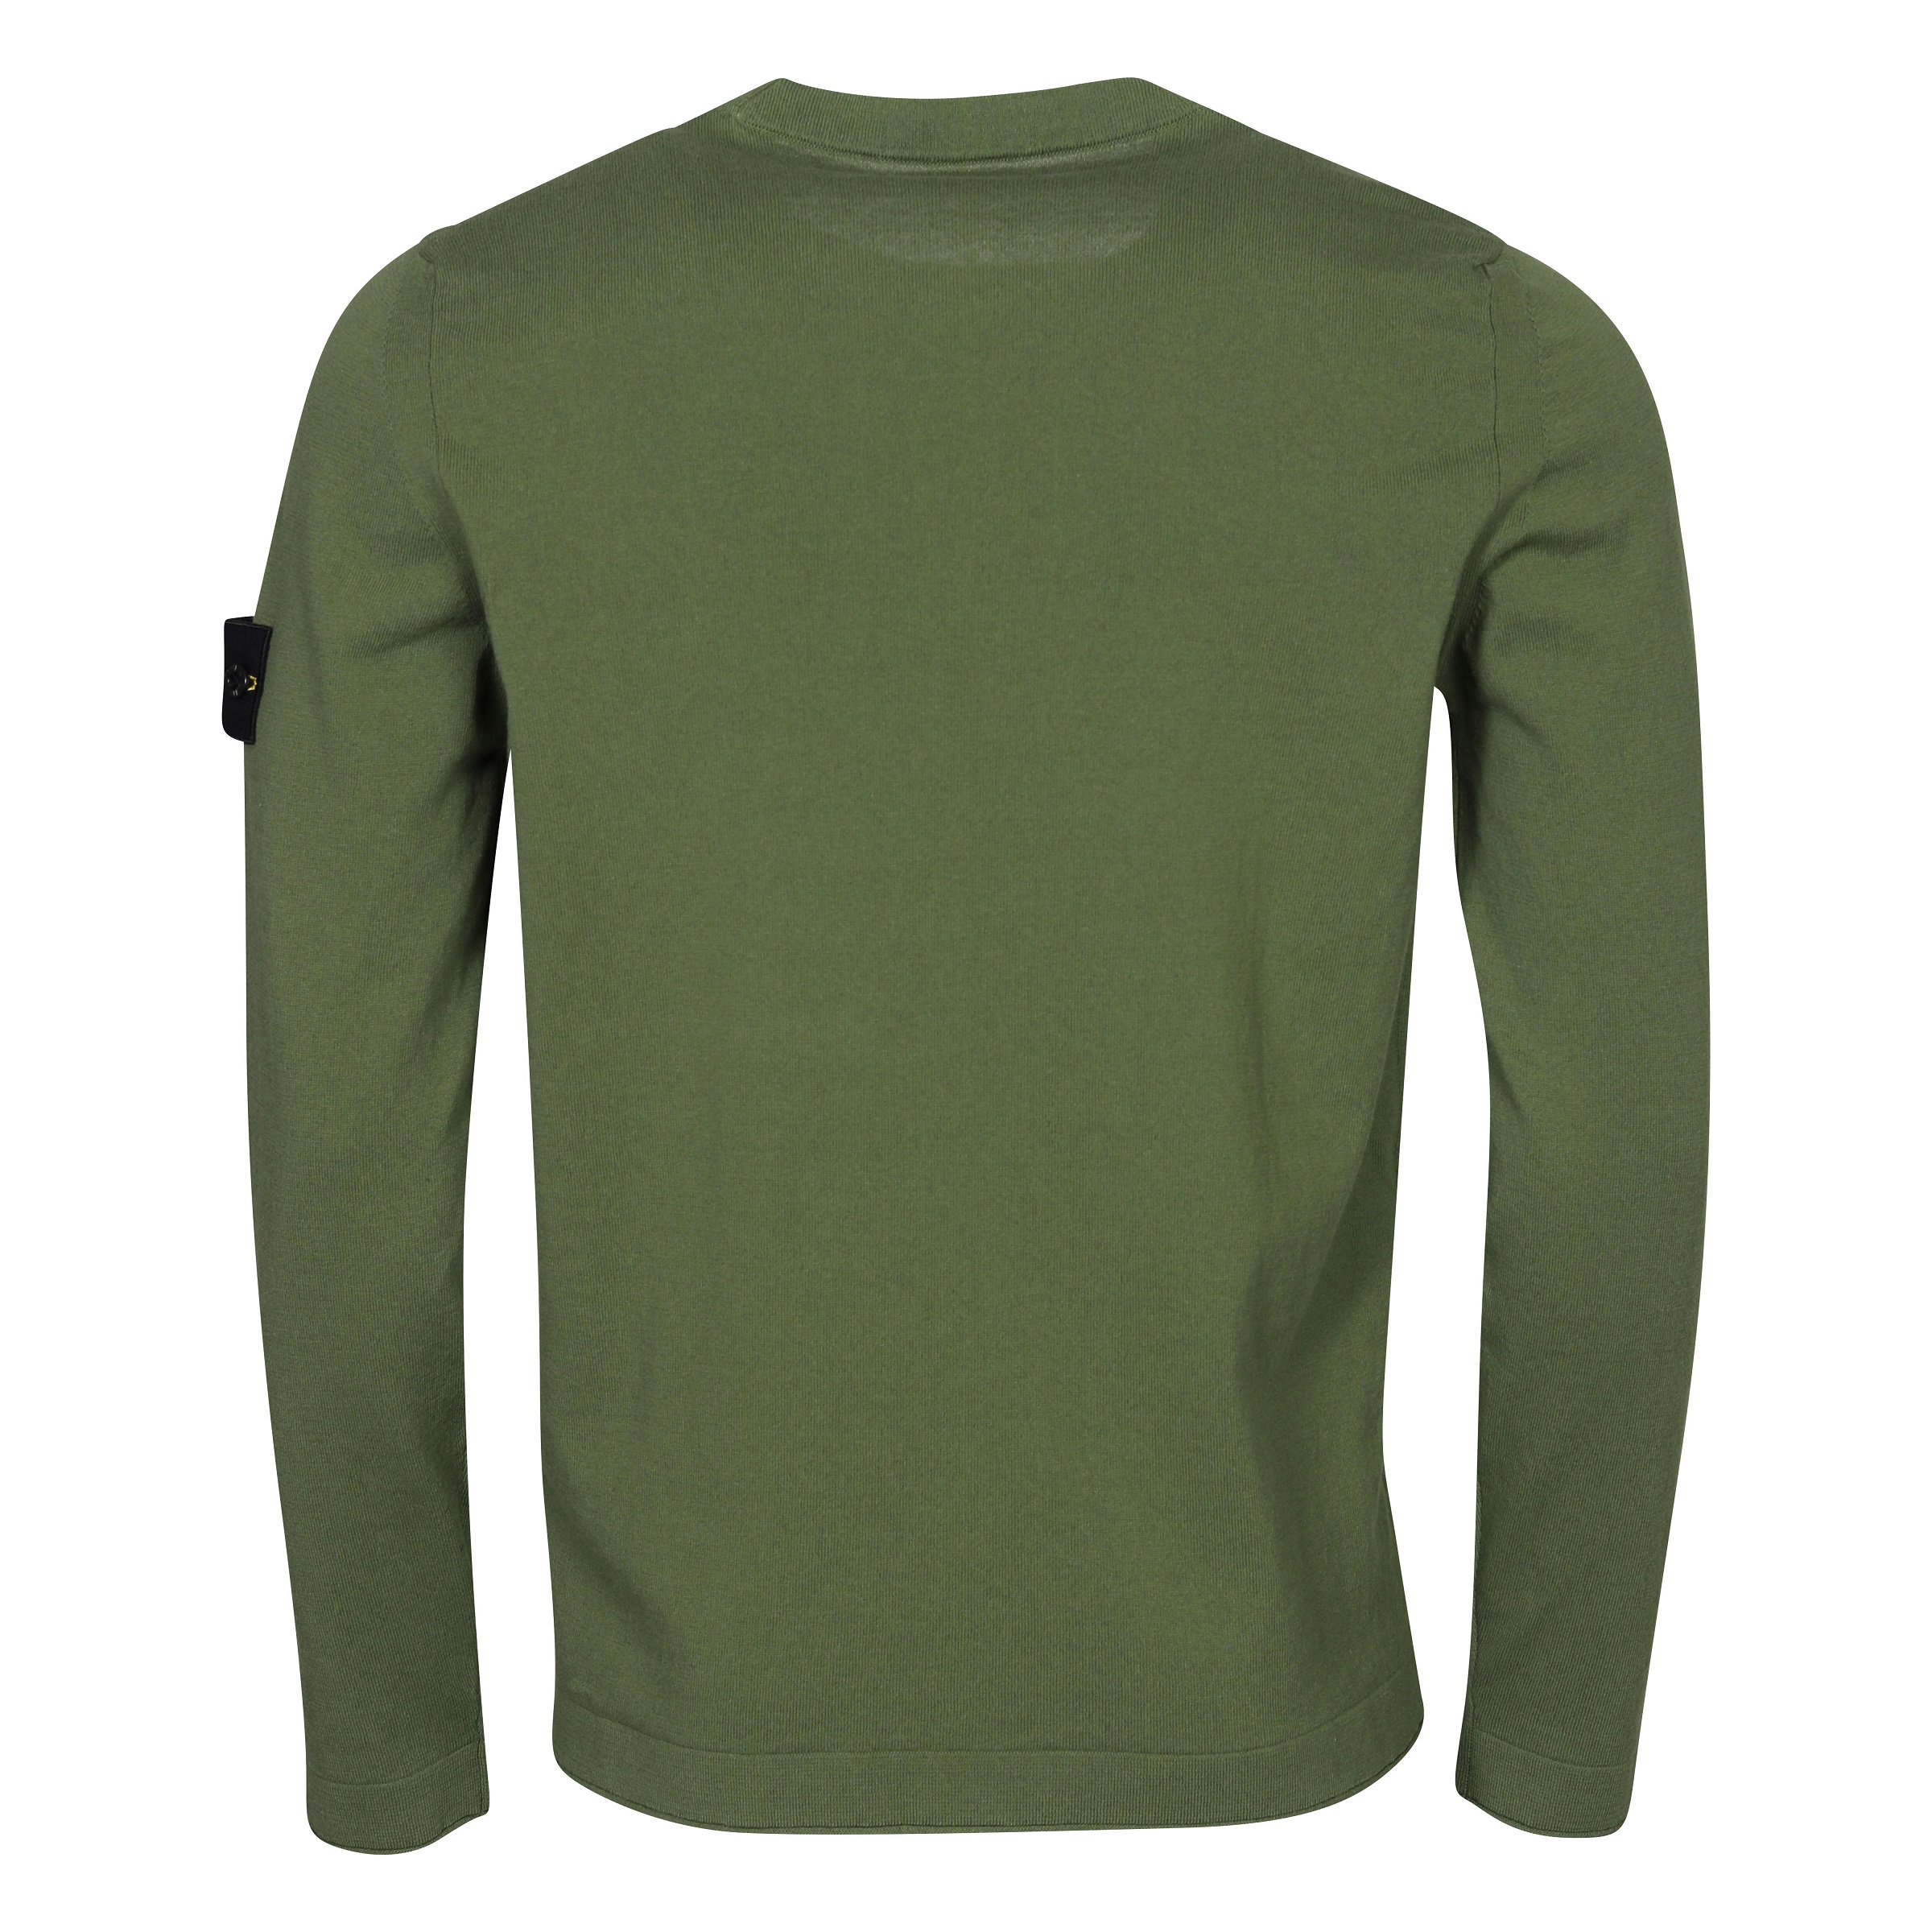 Stone Island Chest Pocket Knit Sweater in Olive  2XL